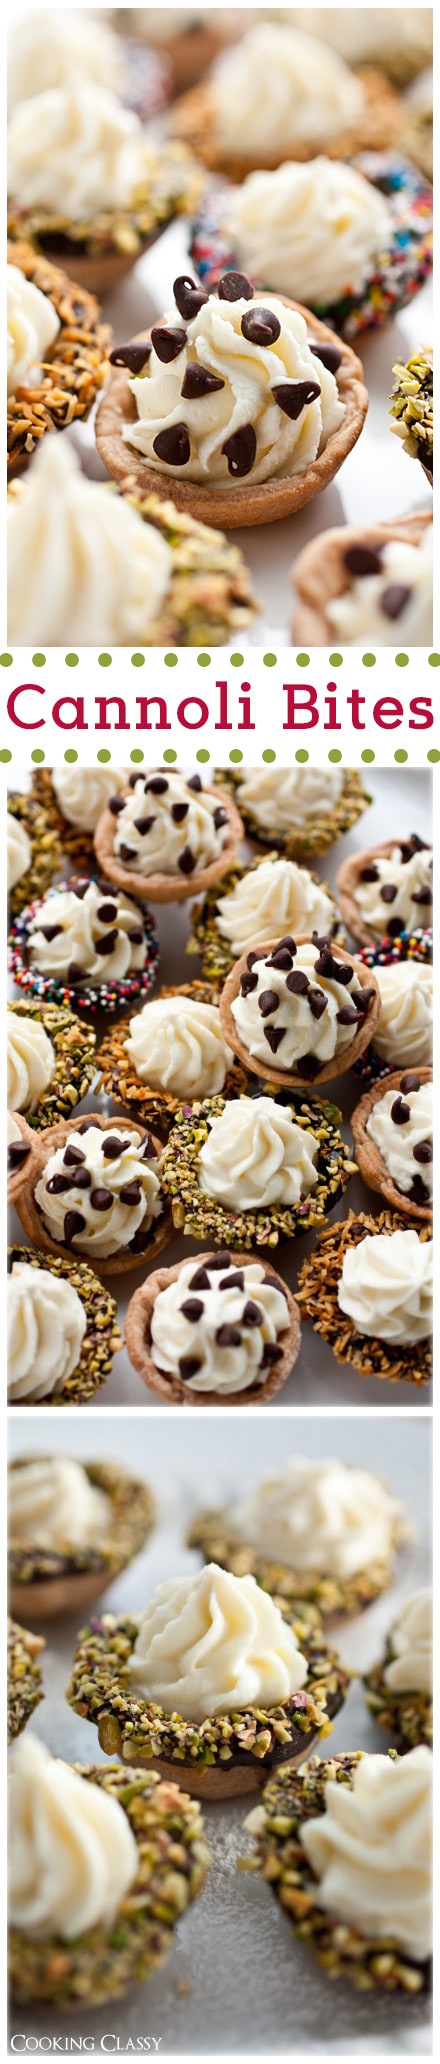 The BEST Bite Size Desserts Recipes and Mini, Individual, Yummy Treats – Perfectly Pretty for Your Baby and Bridal Showers, Weddings and Birthday Party Dessert Tables and Holiday Celebrations!